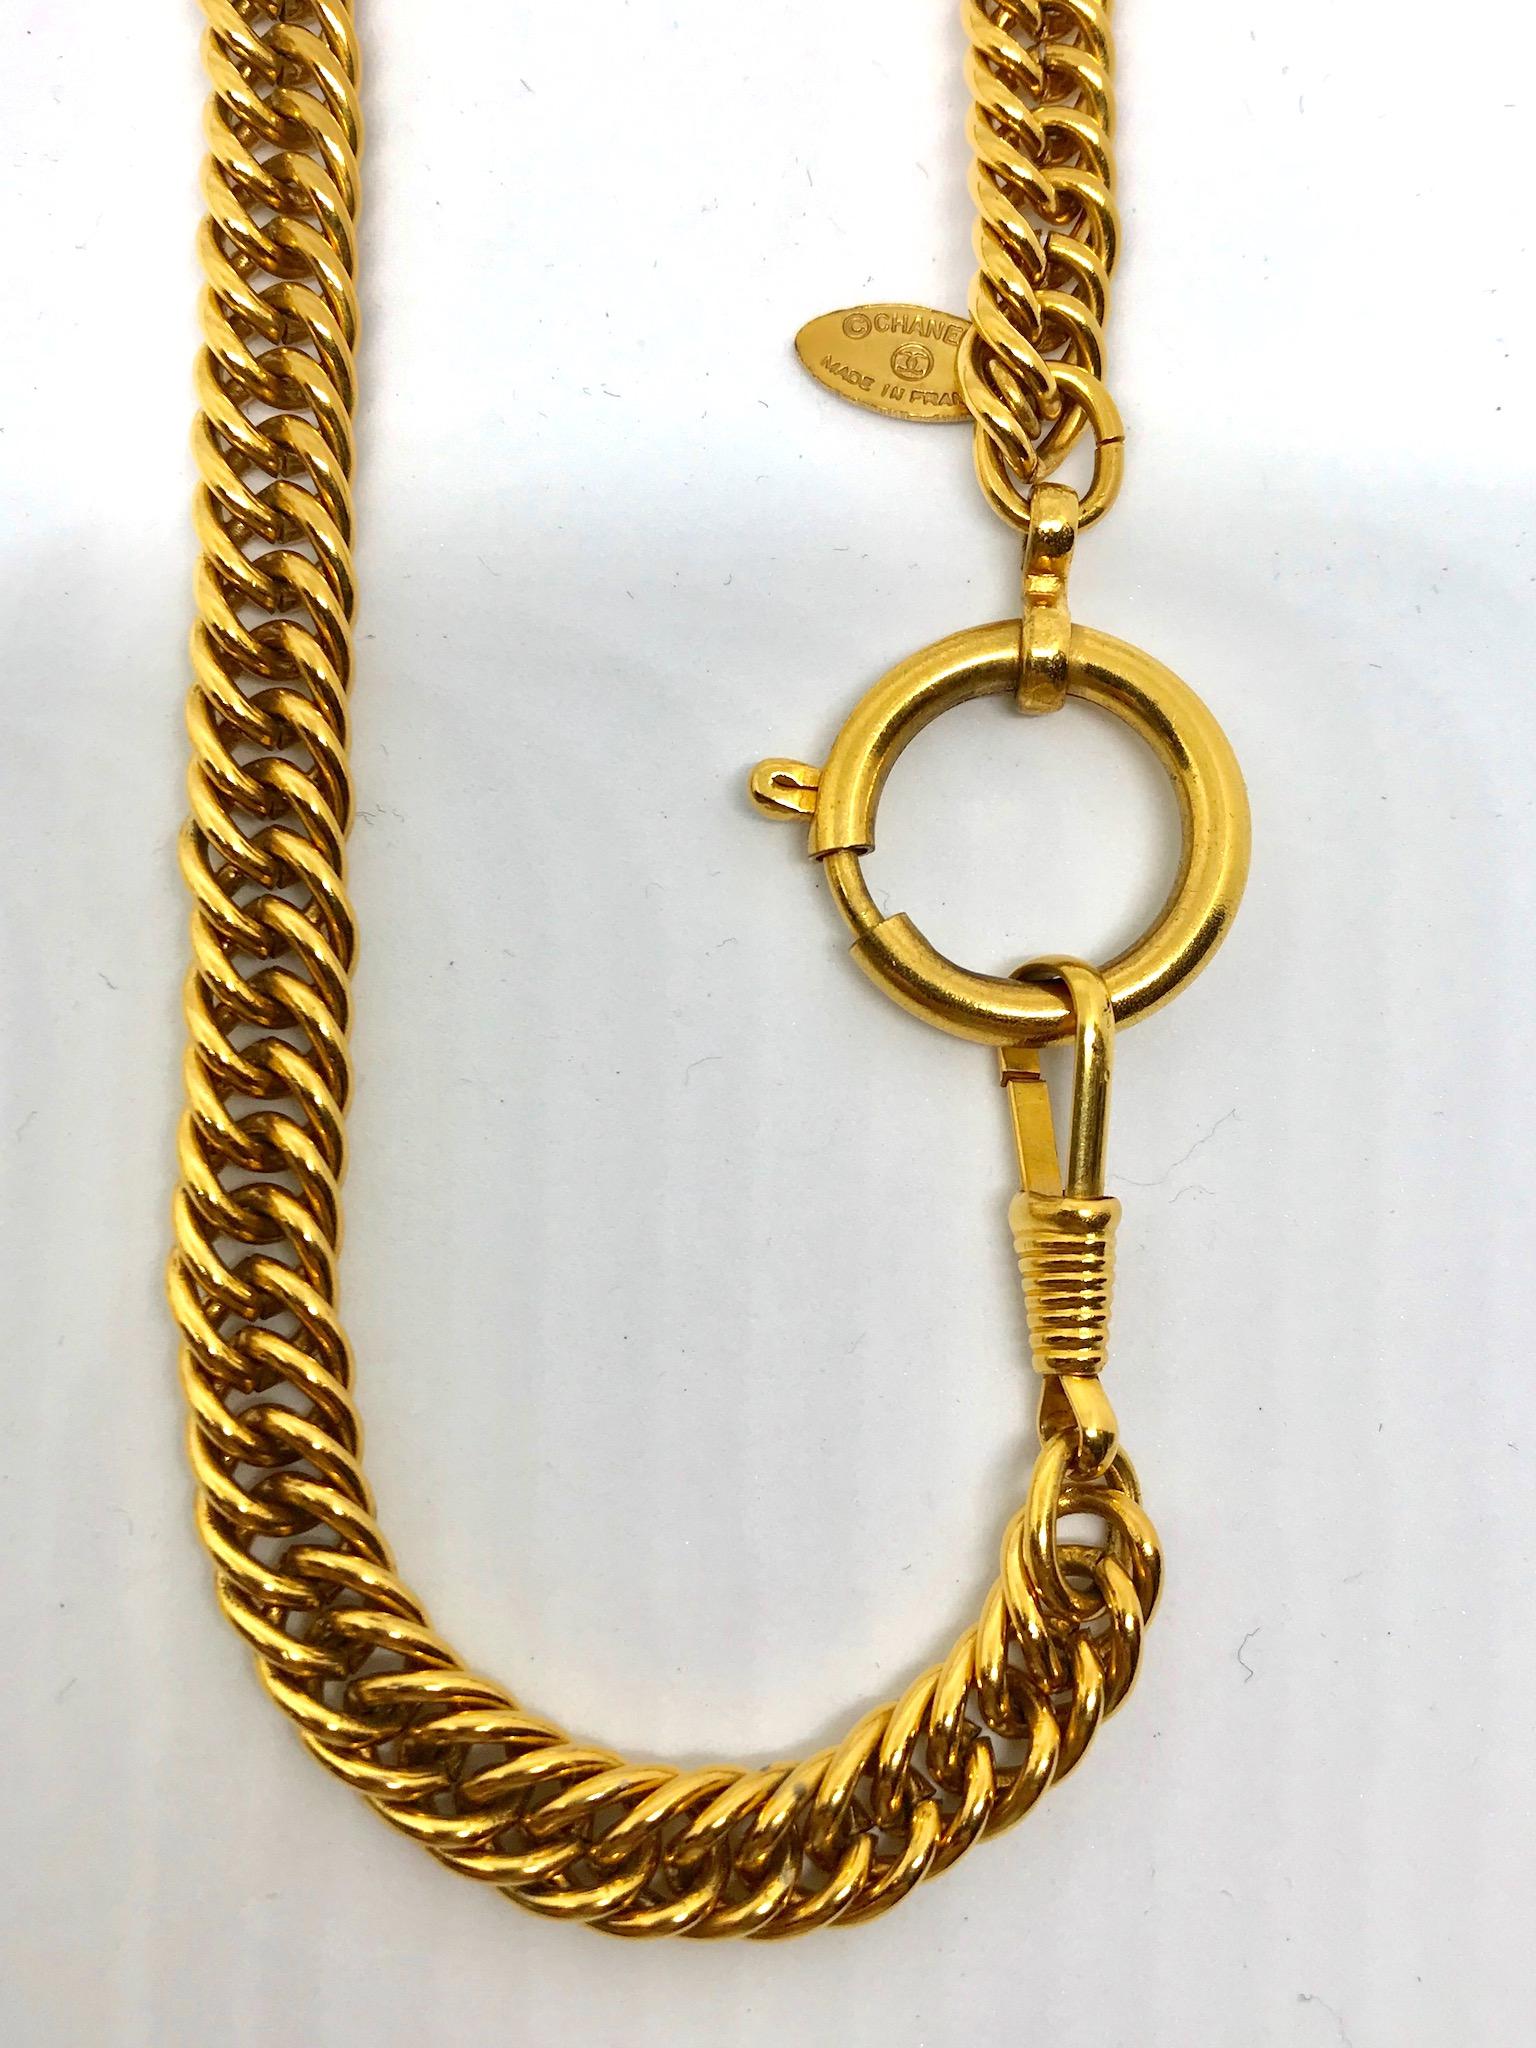 Women's or Men's Chanel Magnifying Glass Pendant Necklace 1980s